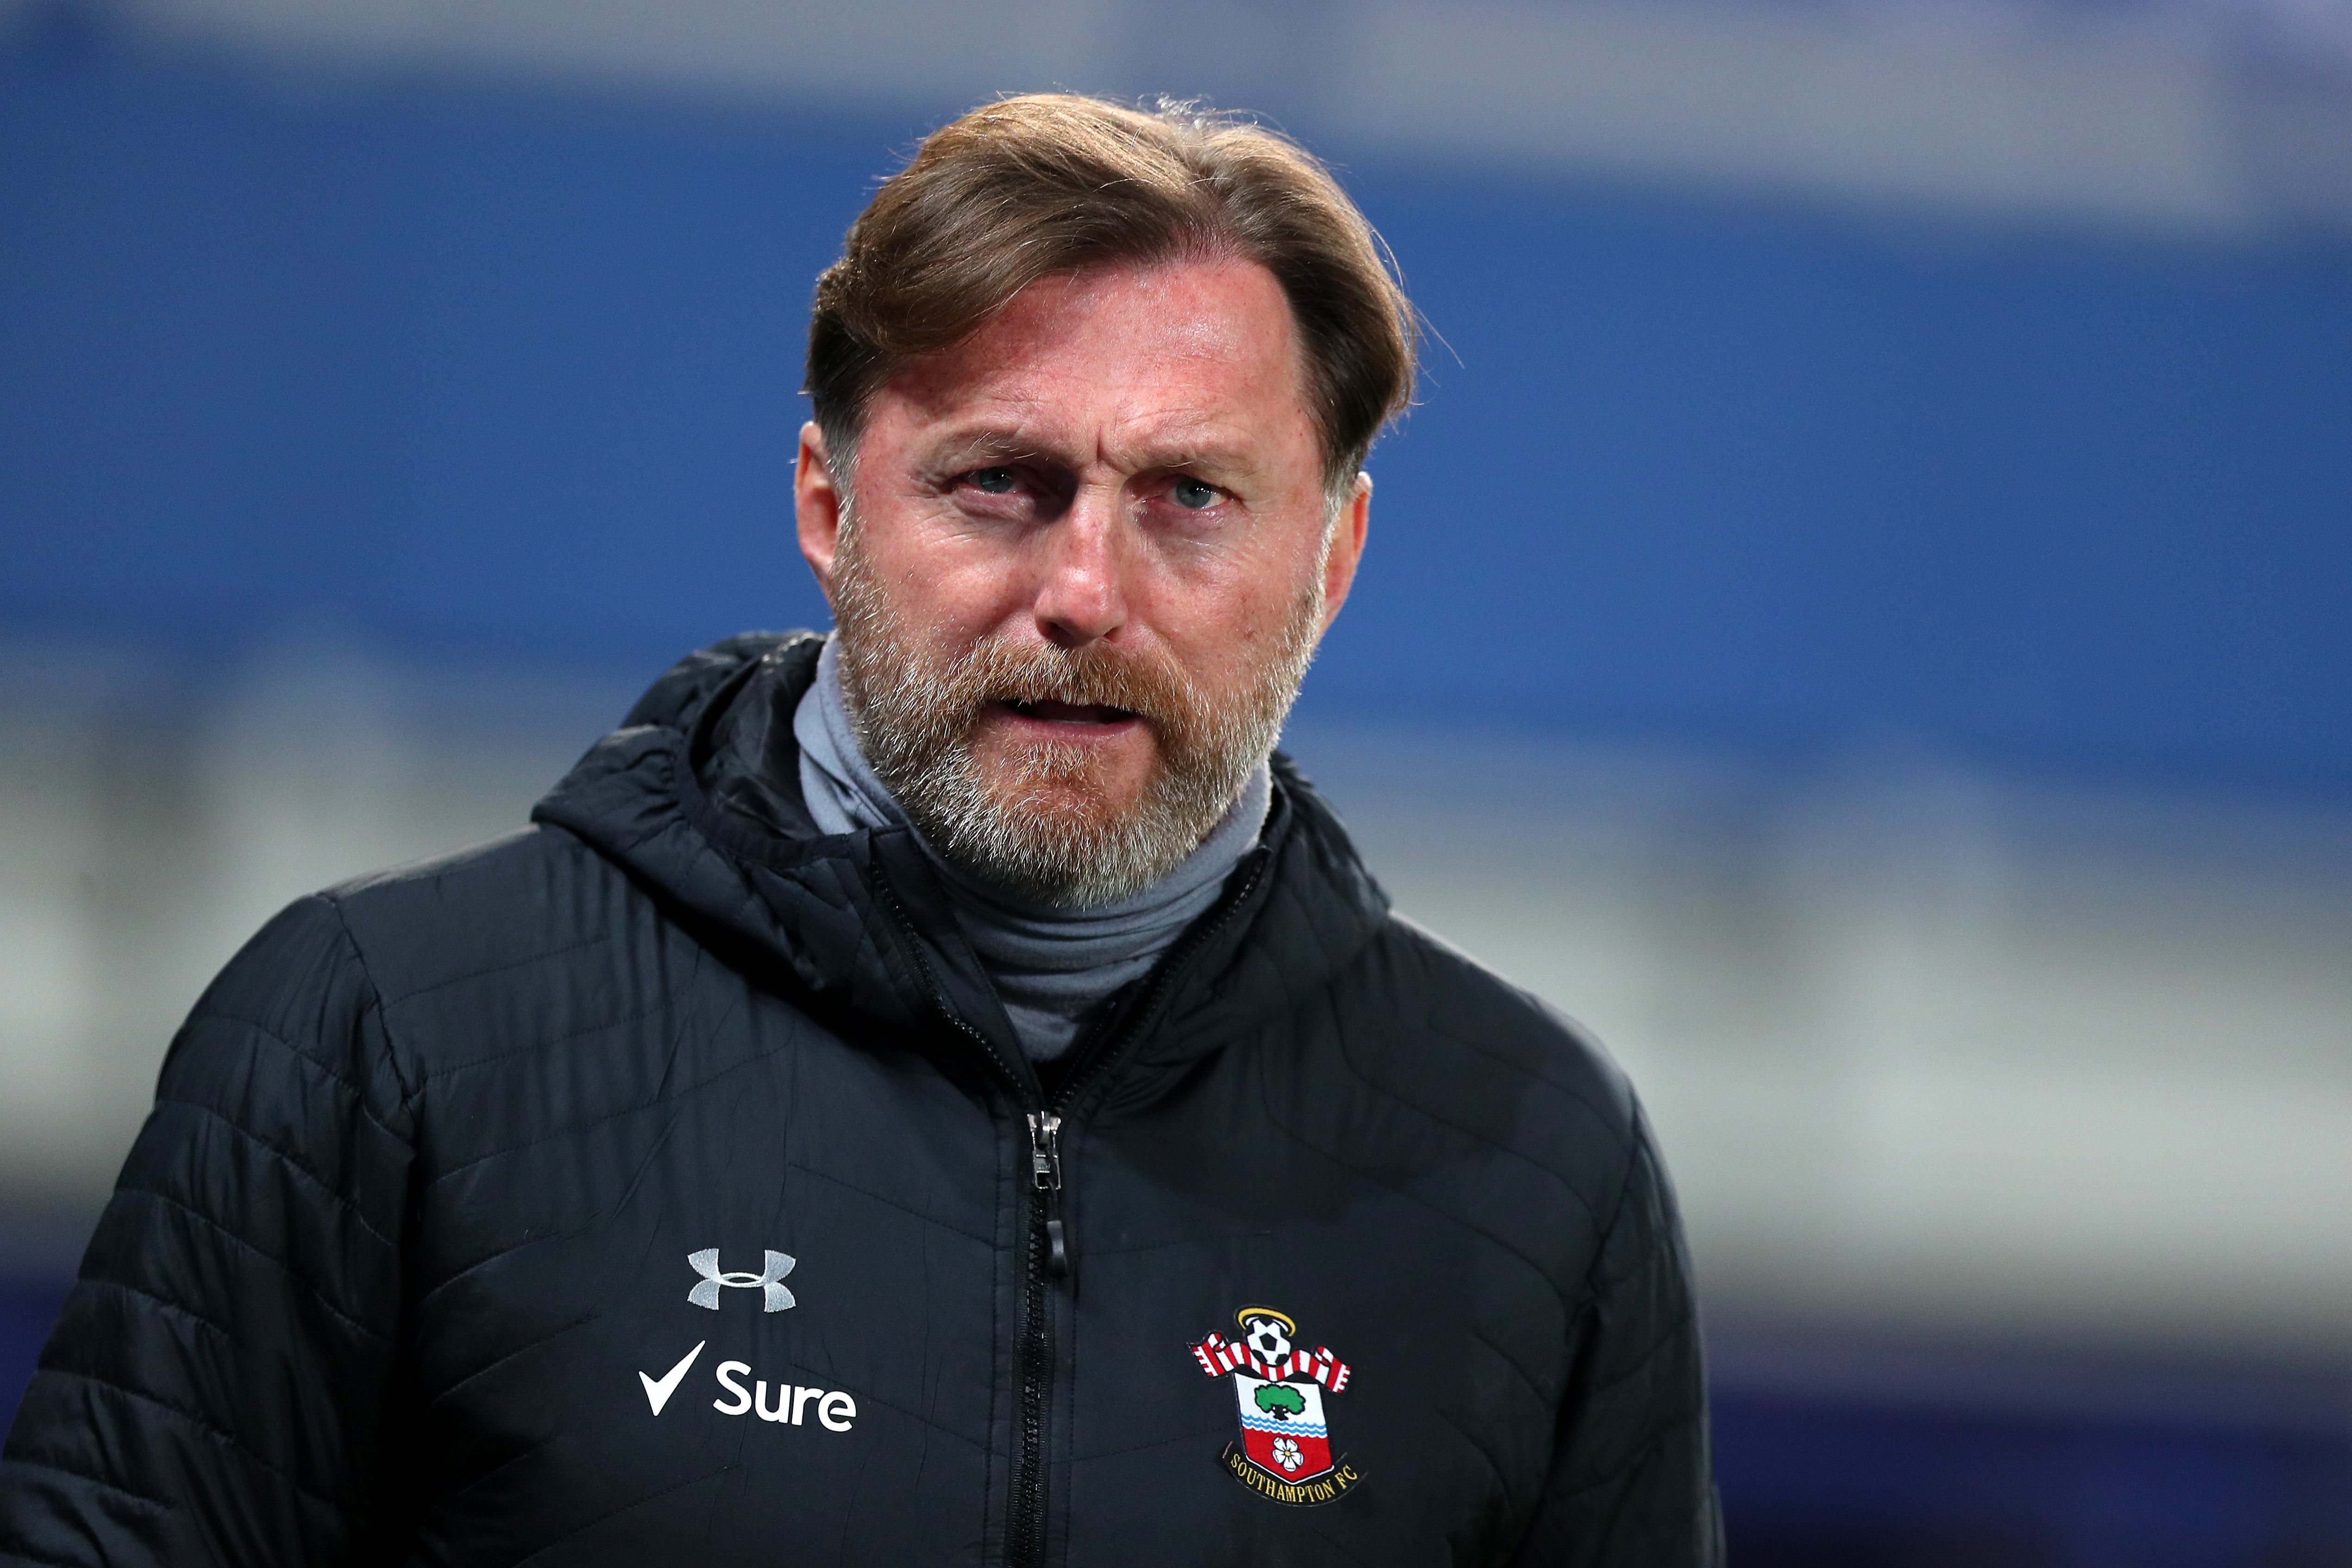 Southampton manager Ralph Hasenhuttl knows his side need to improve at the back